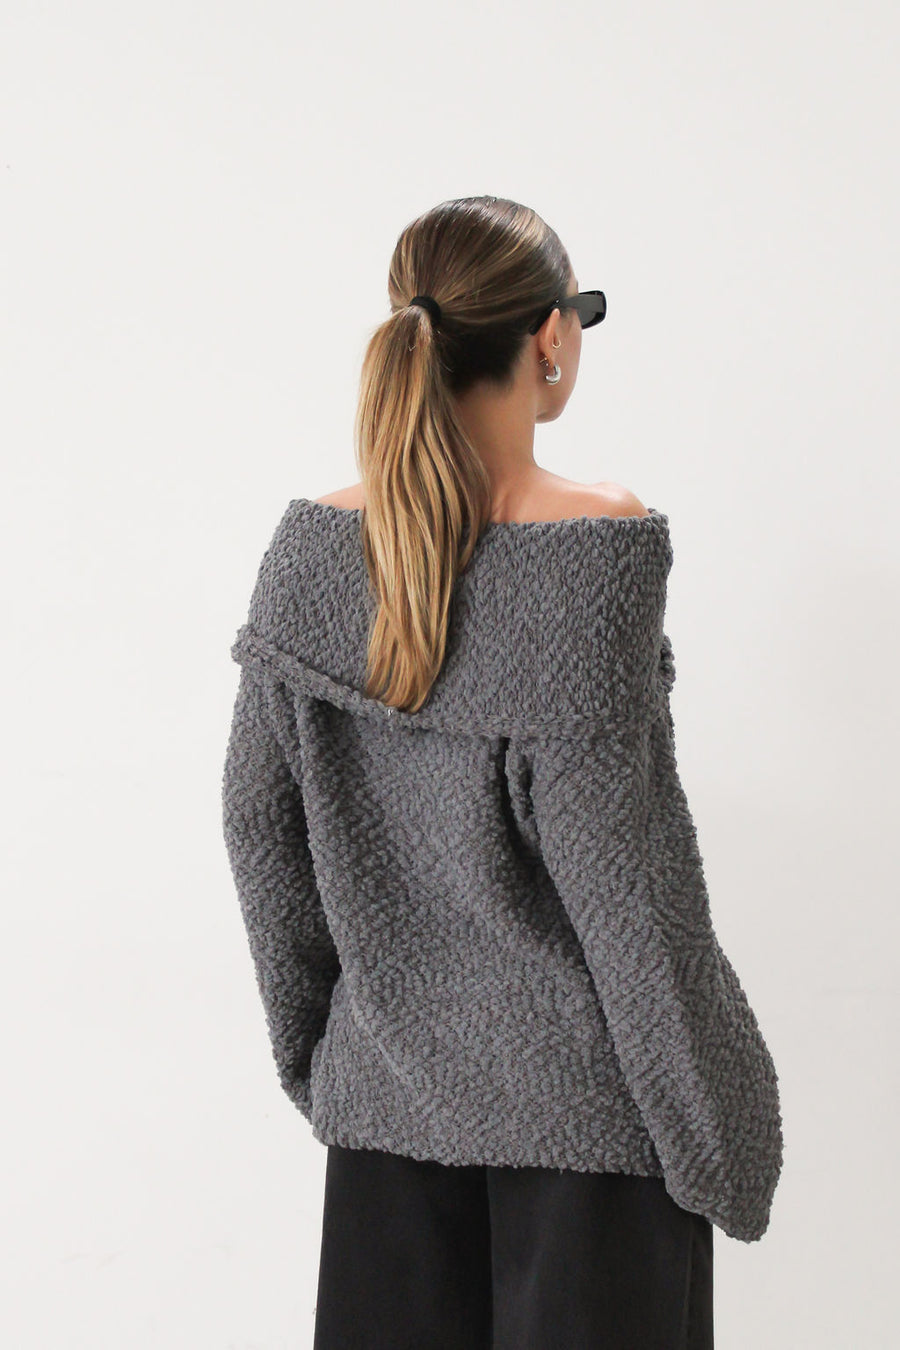 Show Off Sweater - FINAL SALE